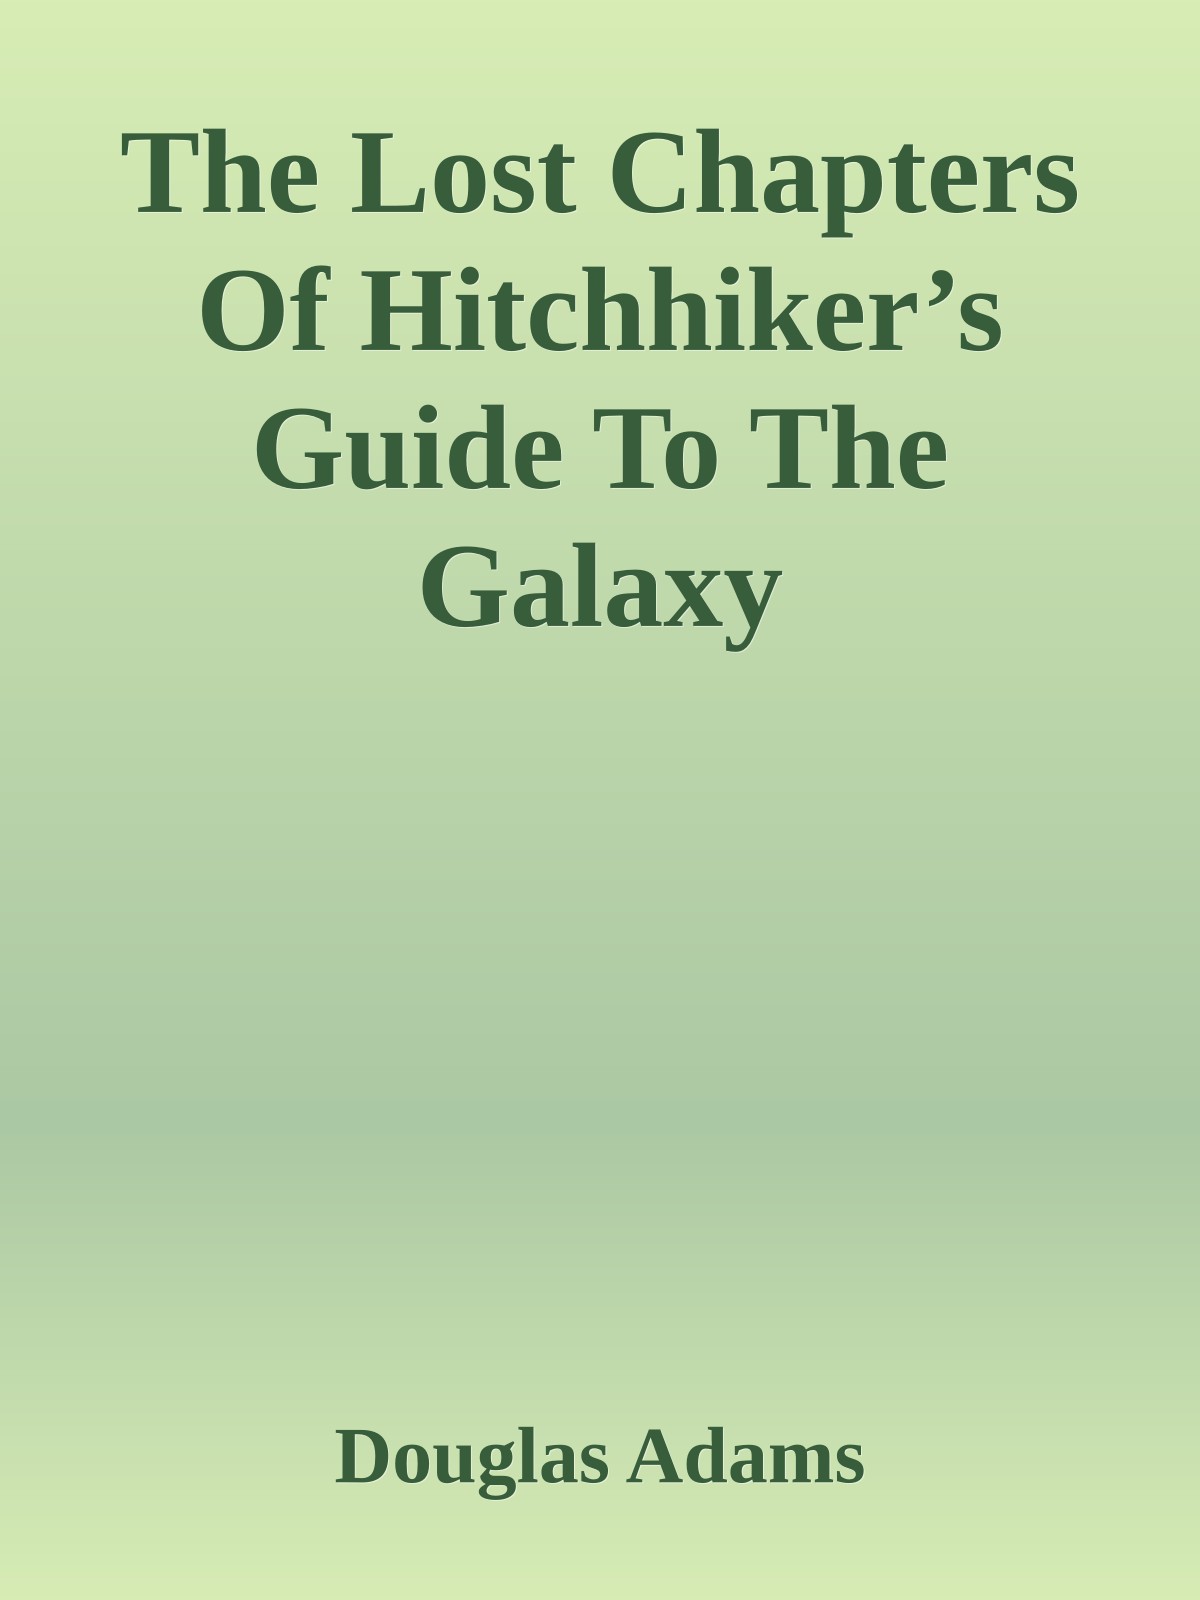 The Lost Chapters of the Hitchhikers Guide to the Galaxy